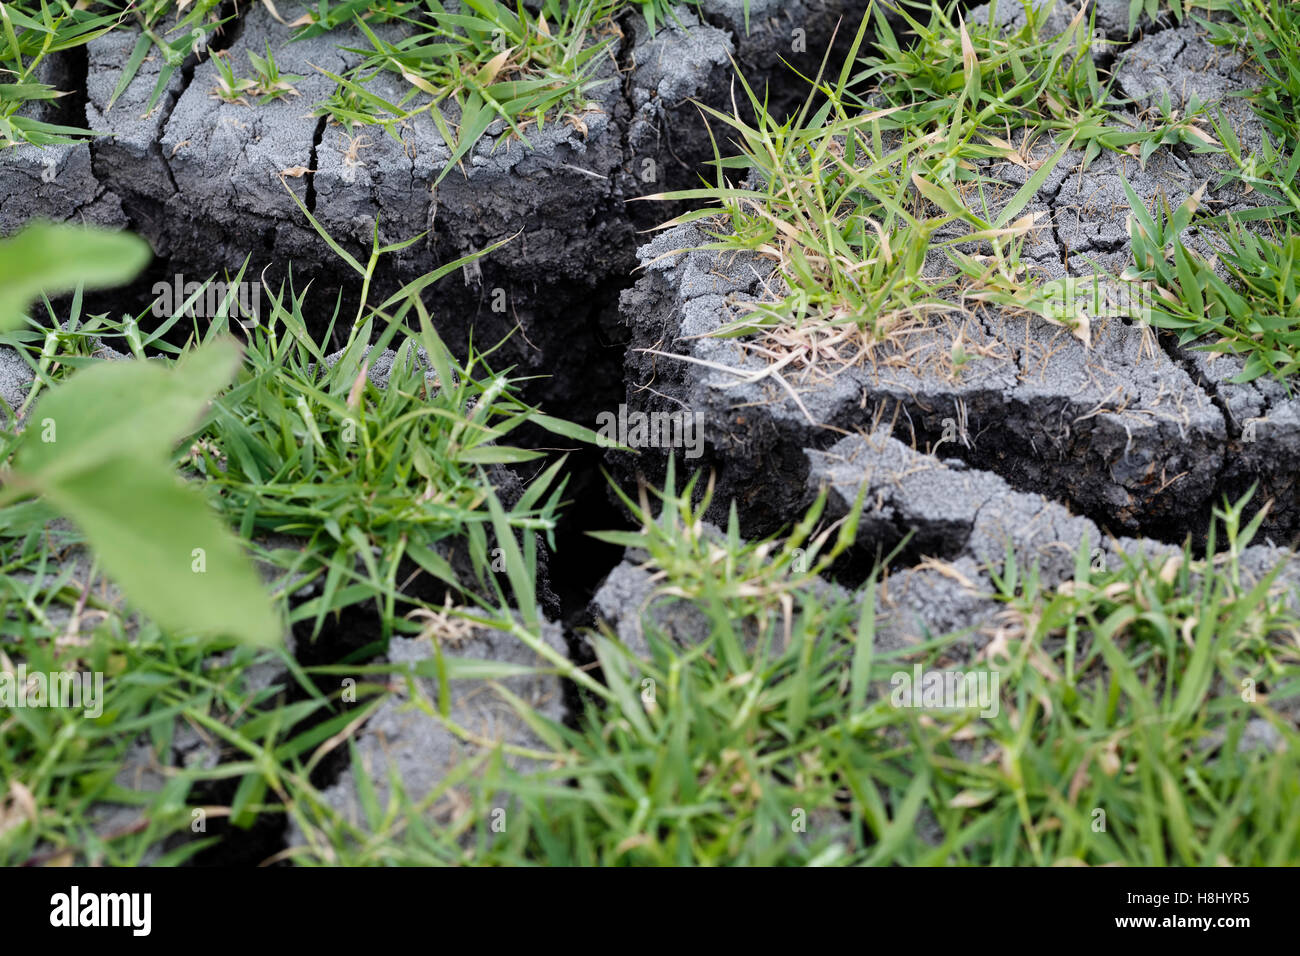 Green Grass Growing On Gray Mud With Deep Cracks From Dryness Stock Photo